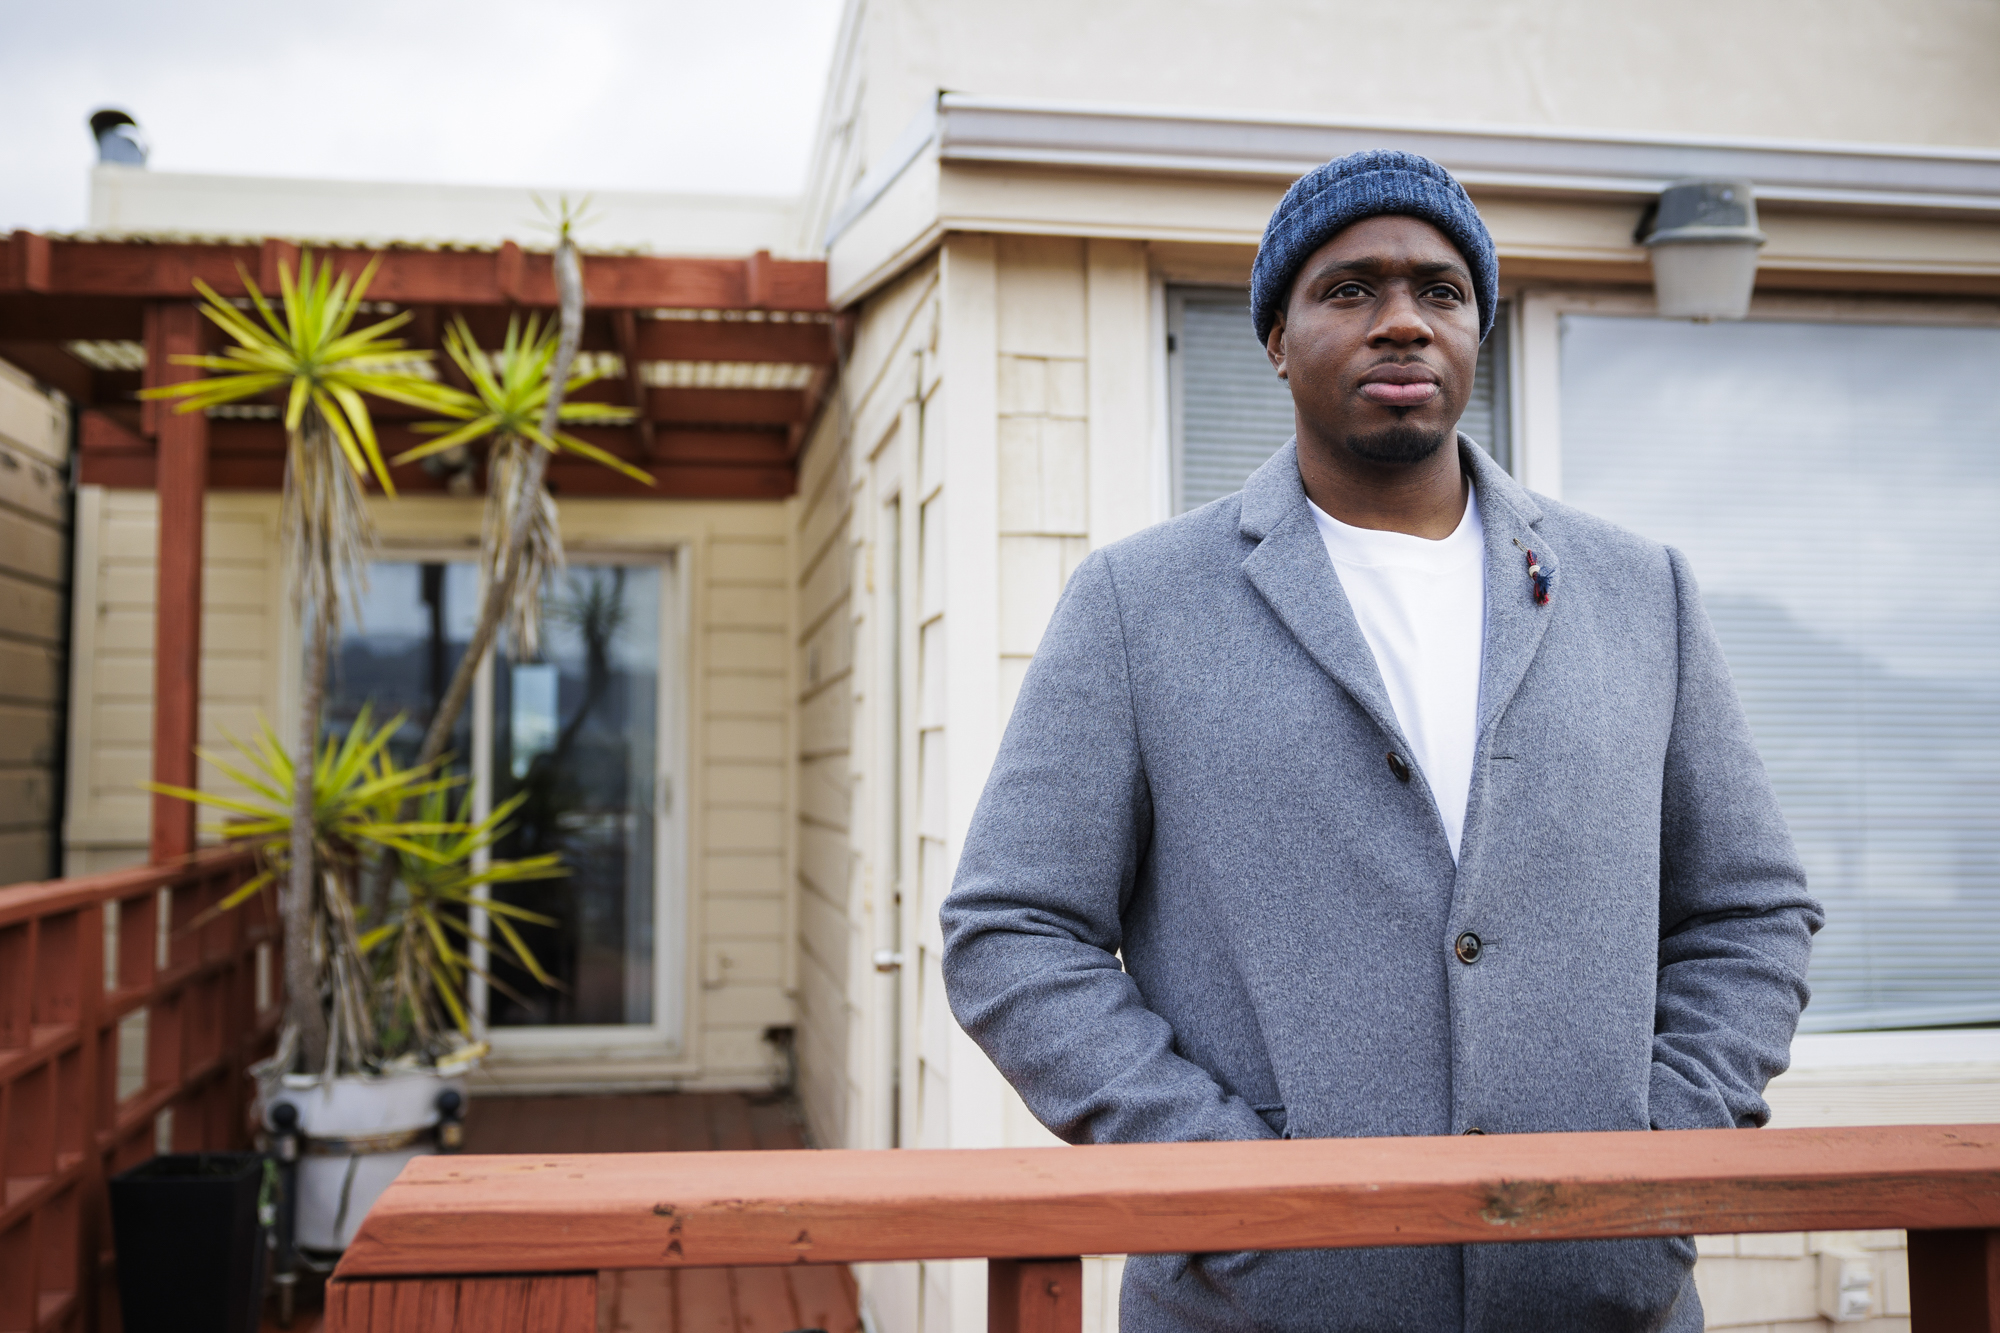 An African American man with a gray blazer and white shirt and a blue beanie stands in front of a house looking away from camera.